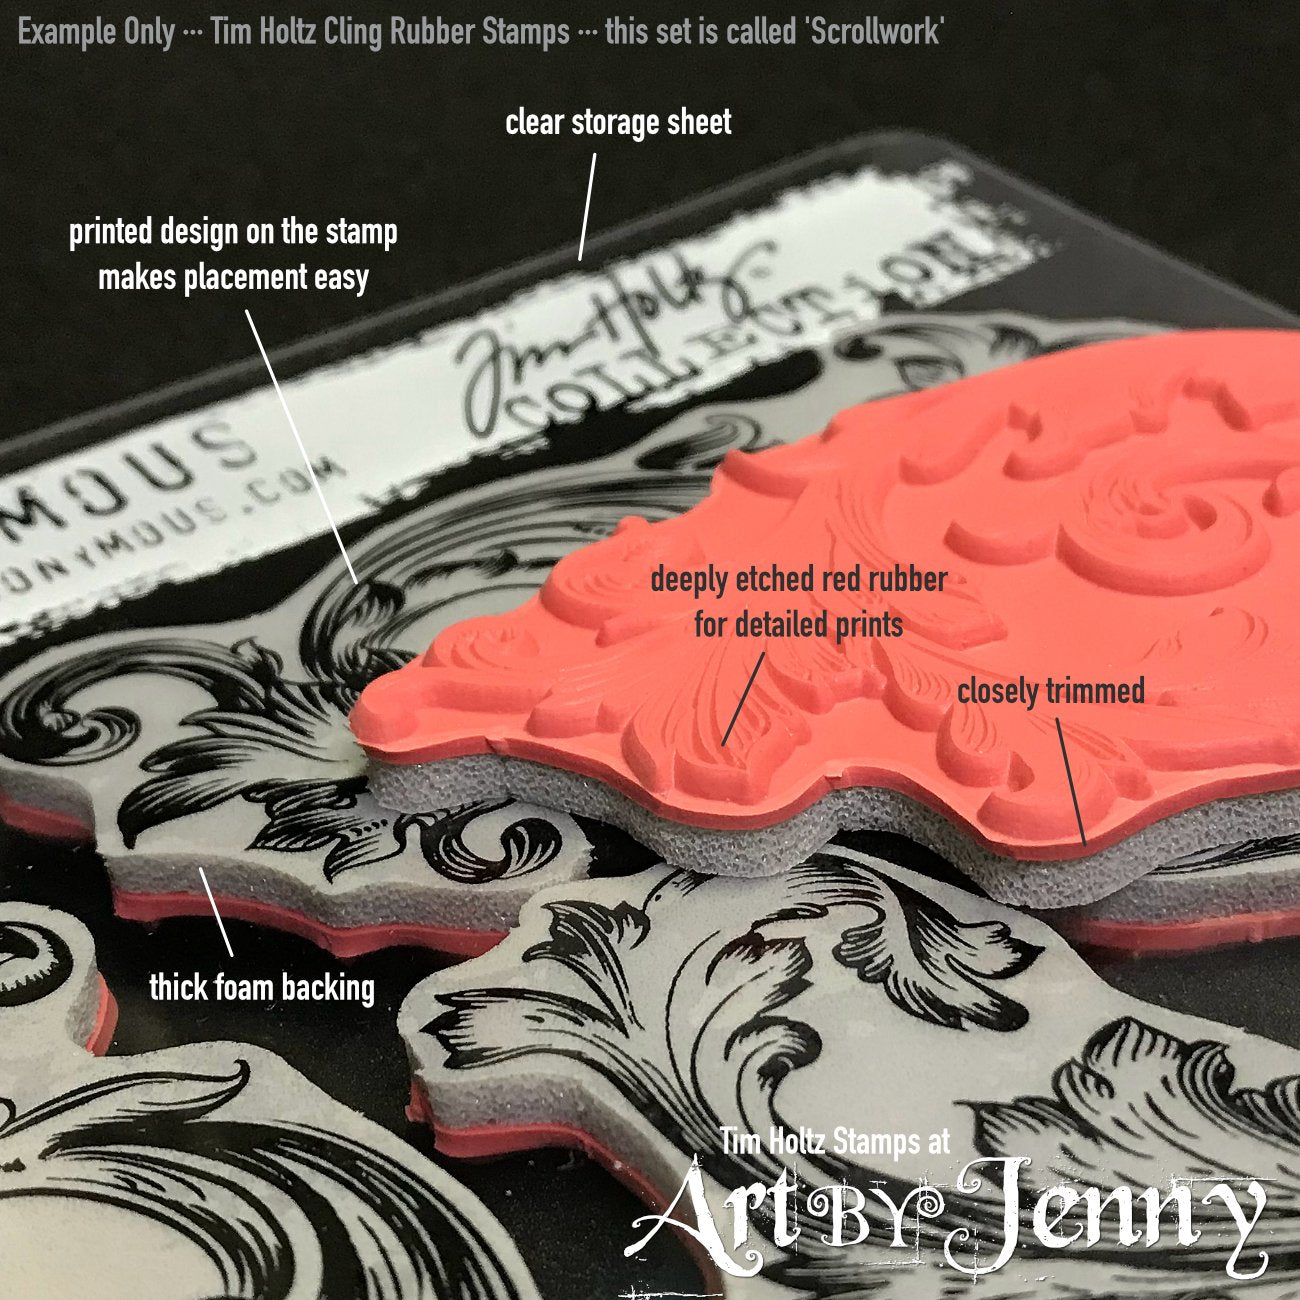 photographic example of Tim Holtz Cling Rubber Stamps with Notations